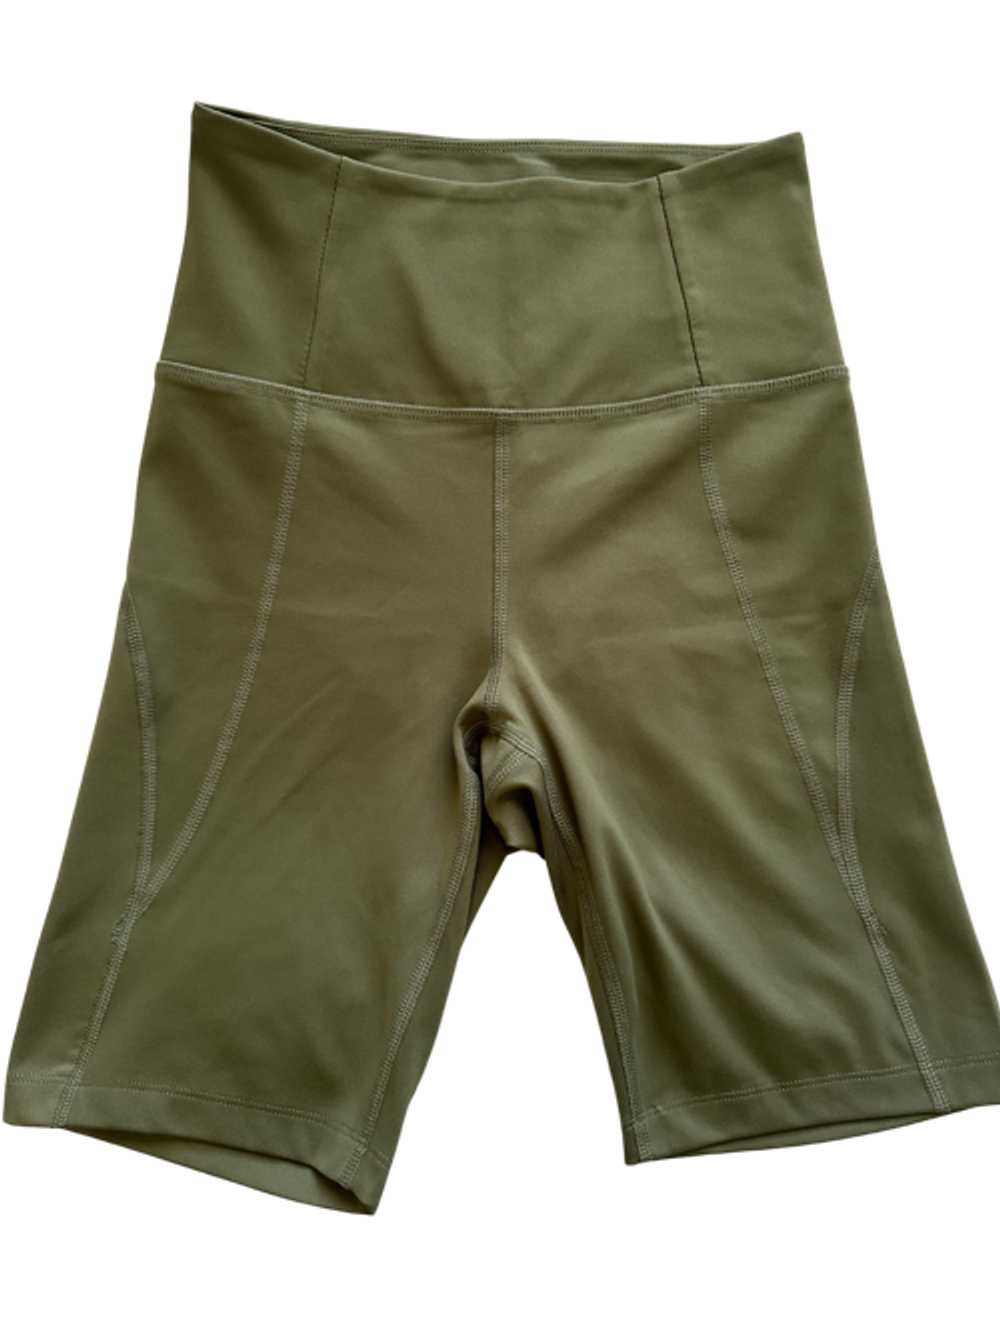 Girlfriend Collective Olive High-Rise Bike Short - image 4